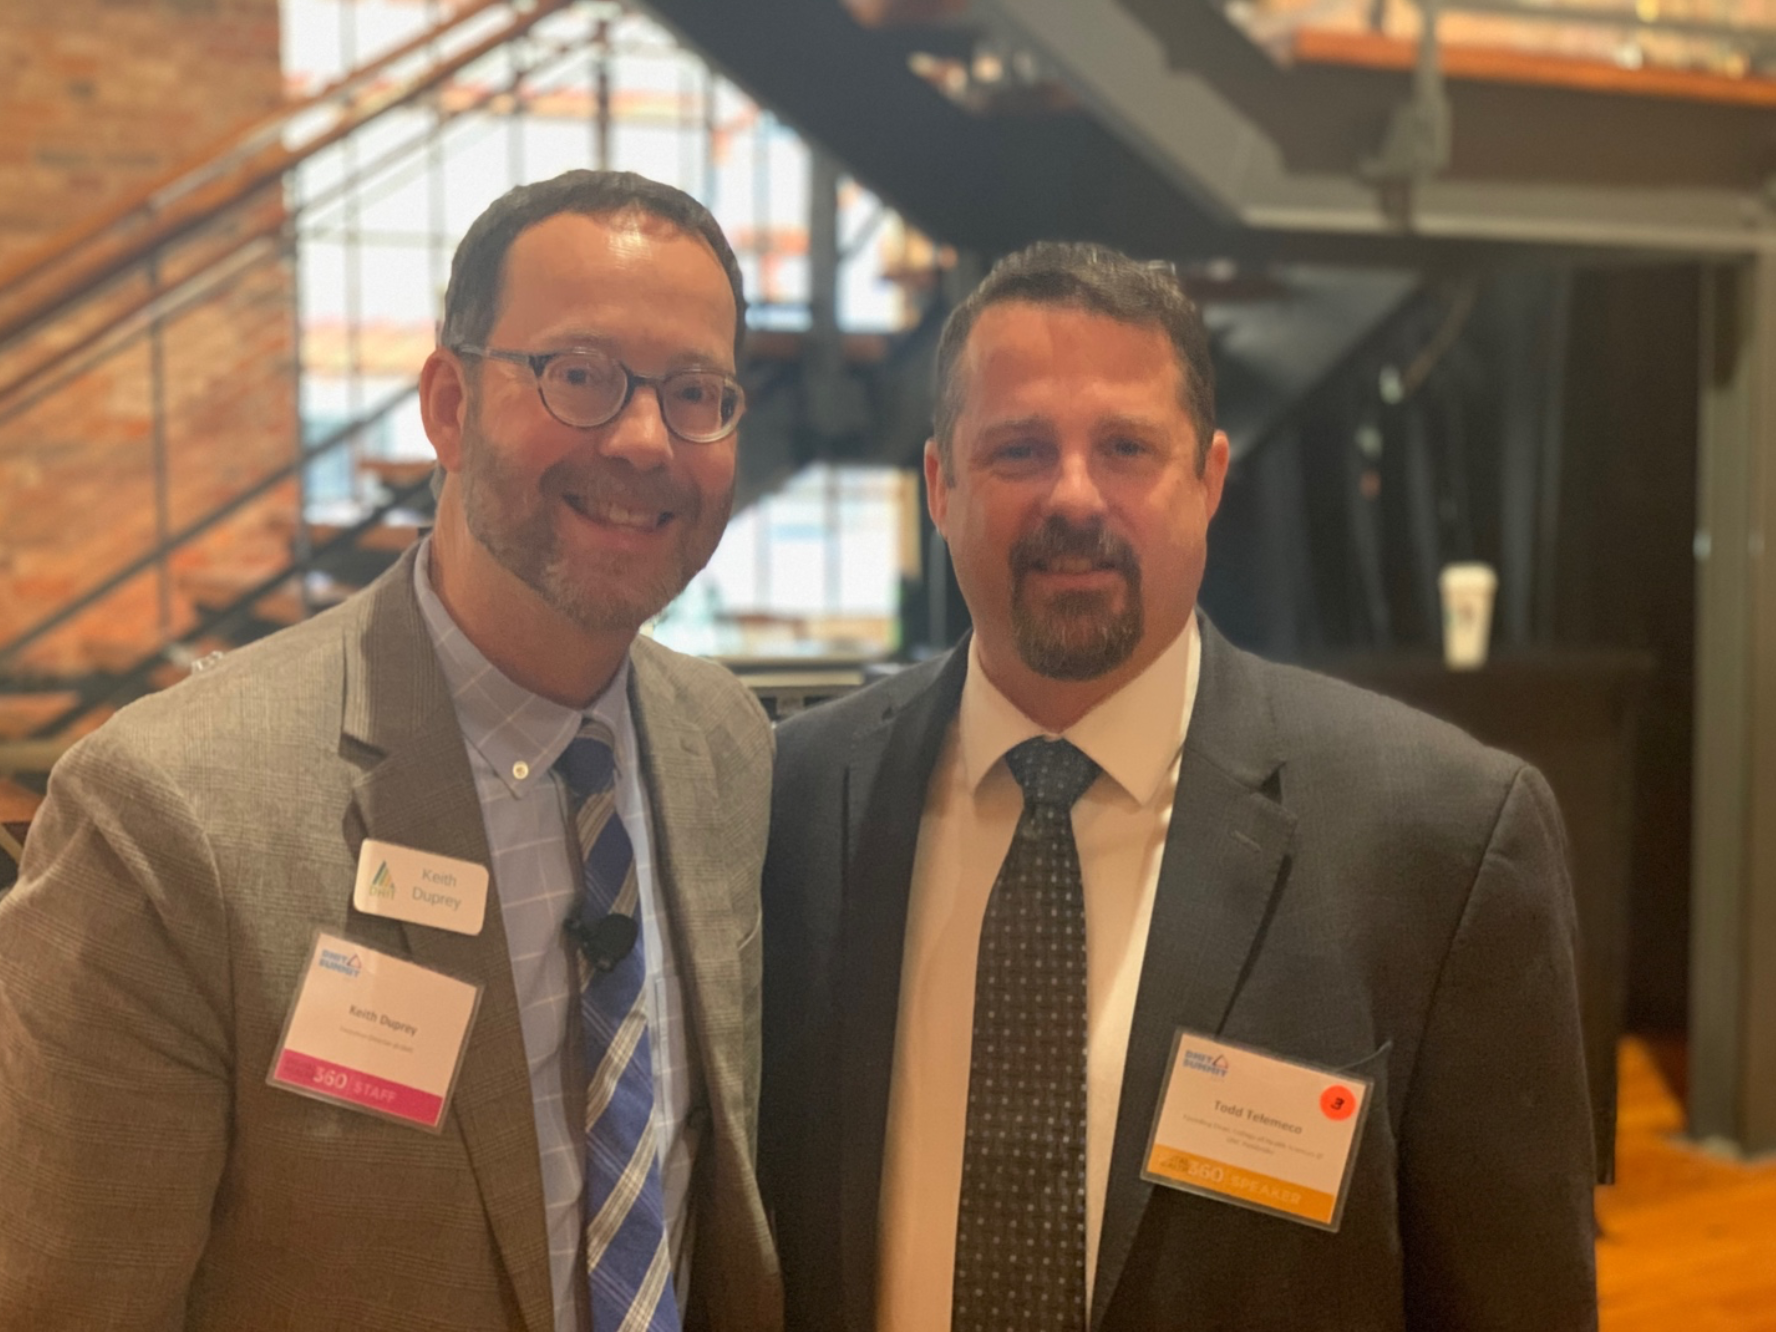 Keith Duprey, Executive Director at DHIT, with Todd Telemeco, Founding Dean of the College of Health Sciences at UNC Pembroke.